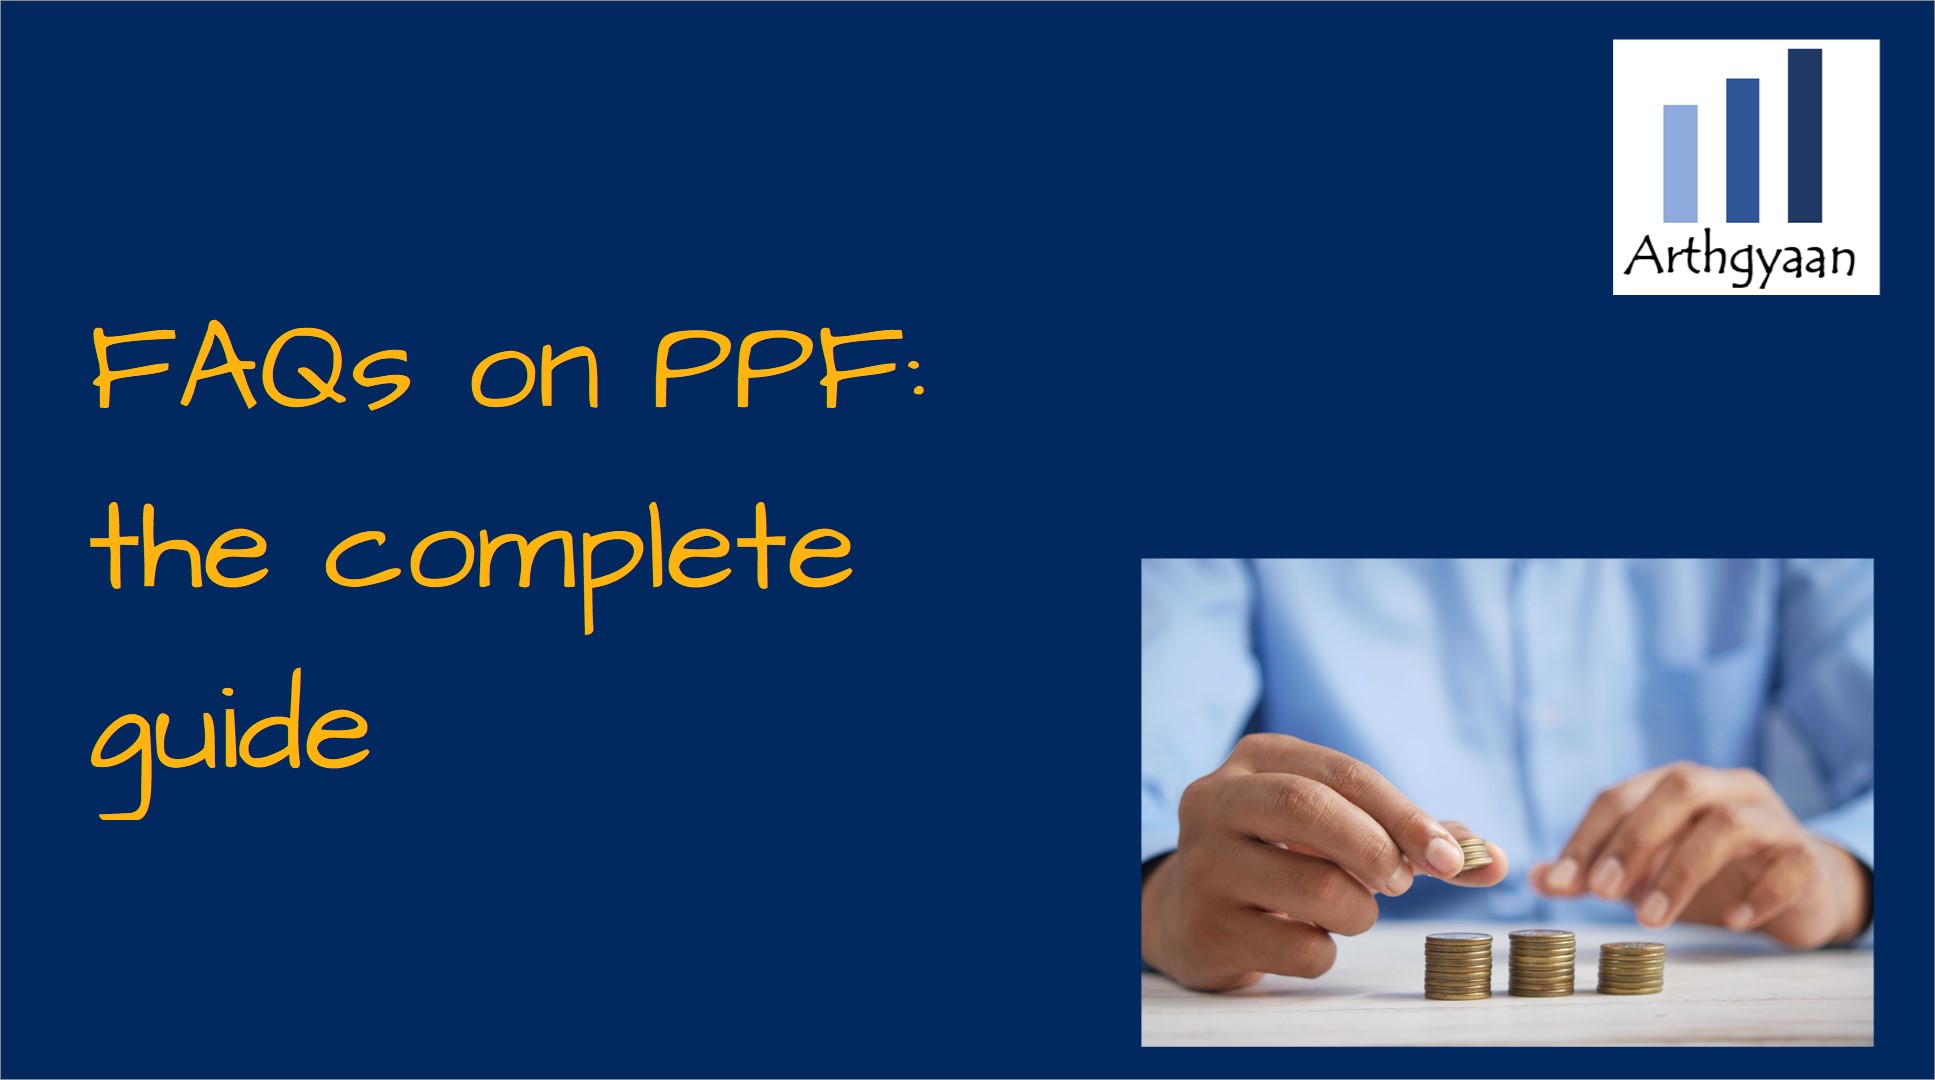 Frequently asked questions on Public Provident fund (PPF): the complete guide